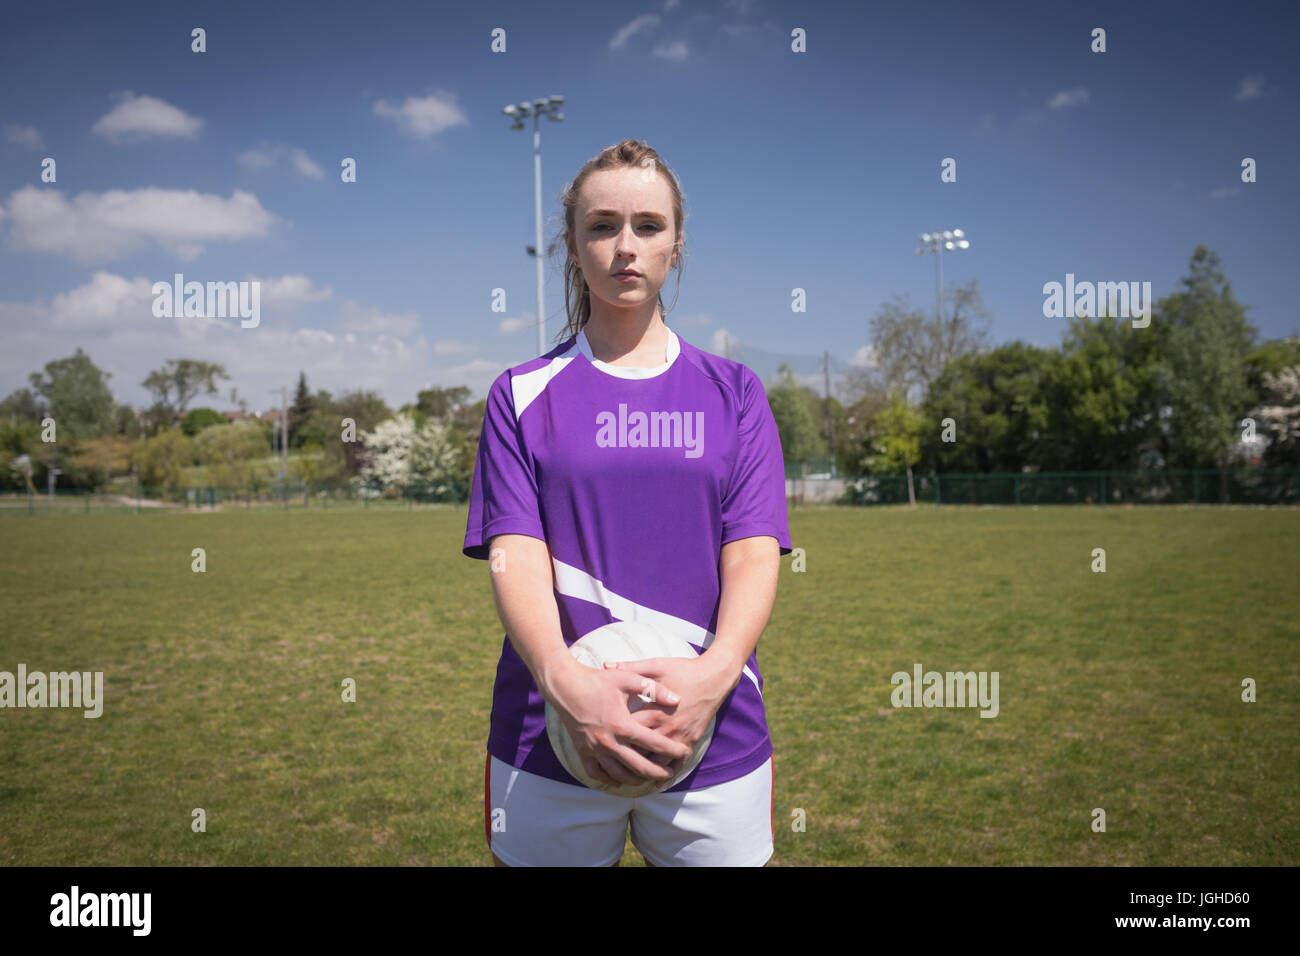 Portrait of young woman holding soccer ball on field against sky Banque D'Images